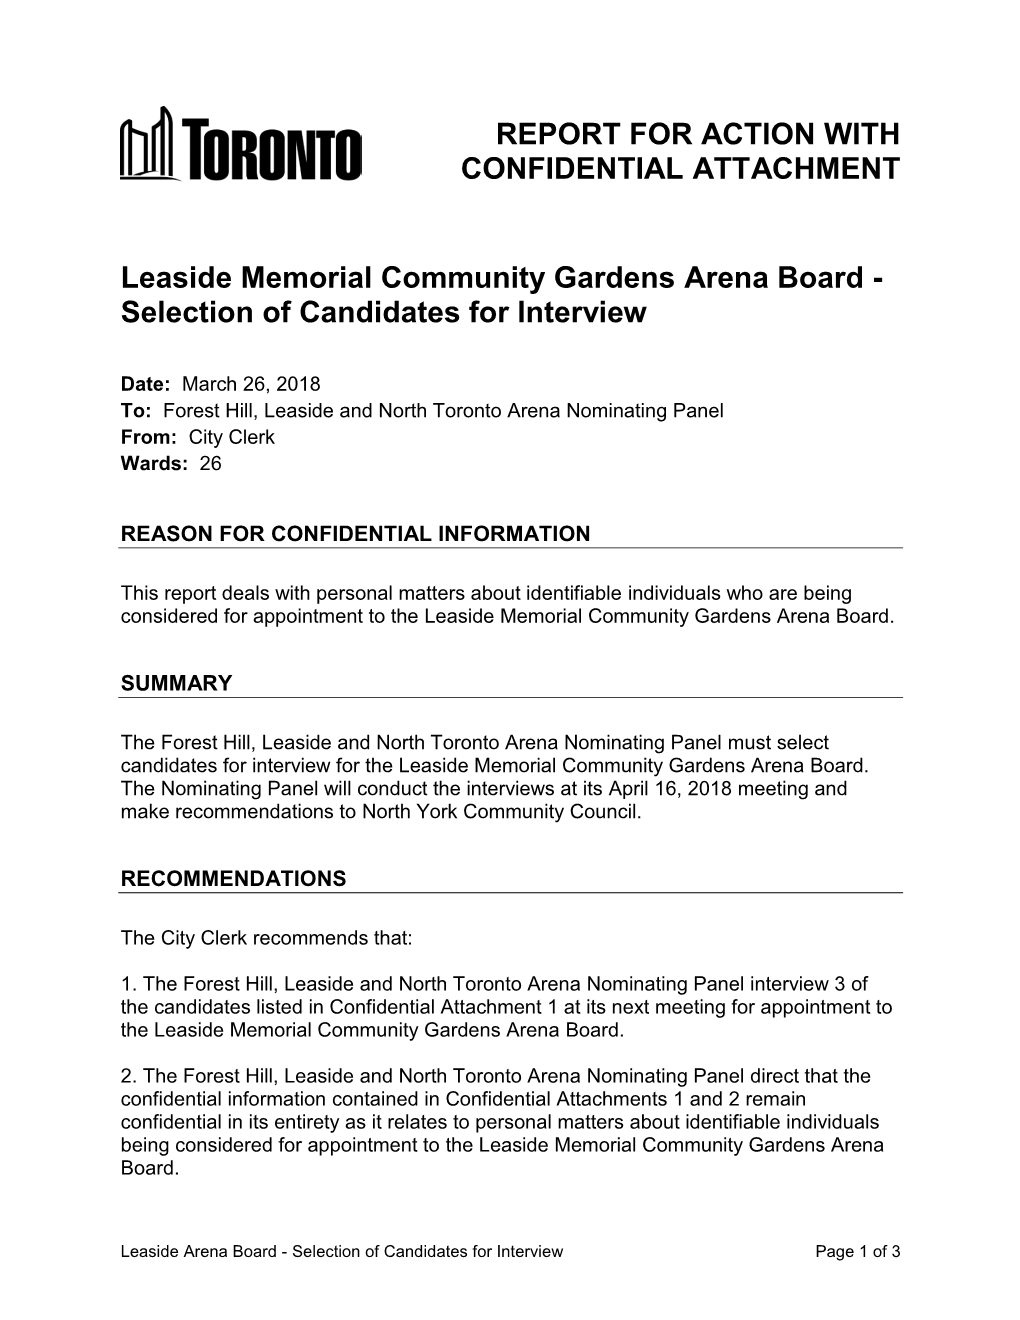 Leaside Memorial Community Gardens Arena Board - Selection of Candidates for Interview